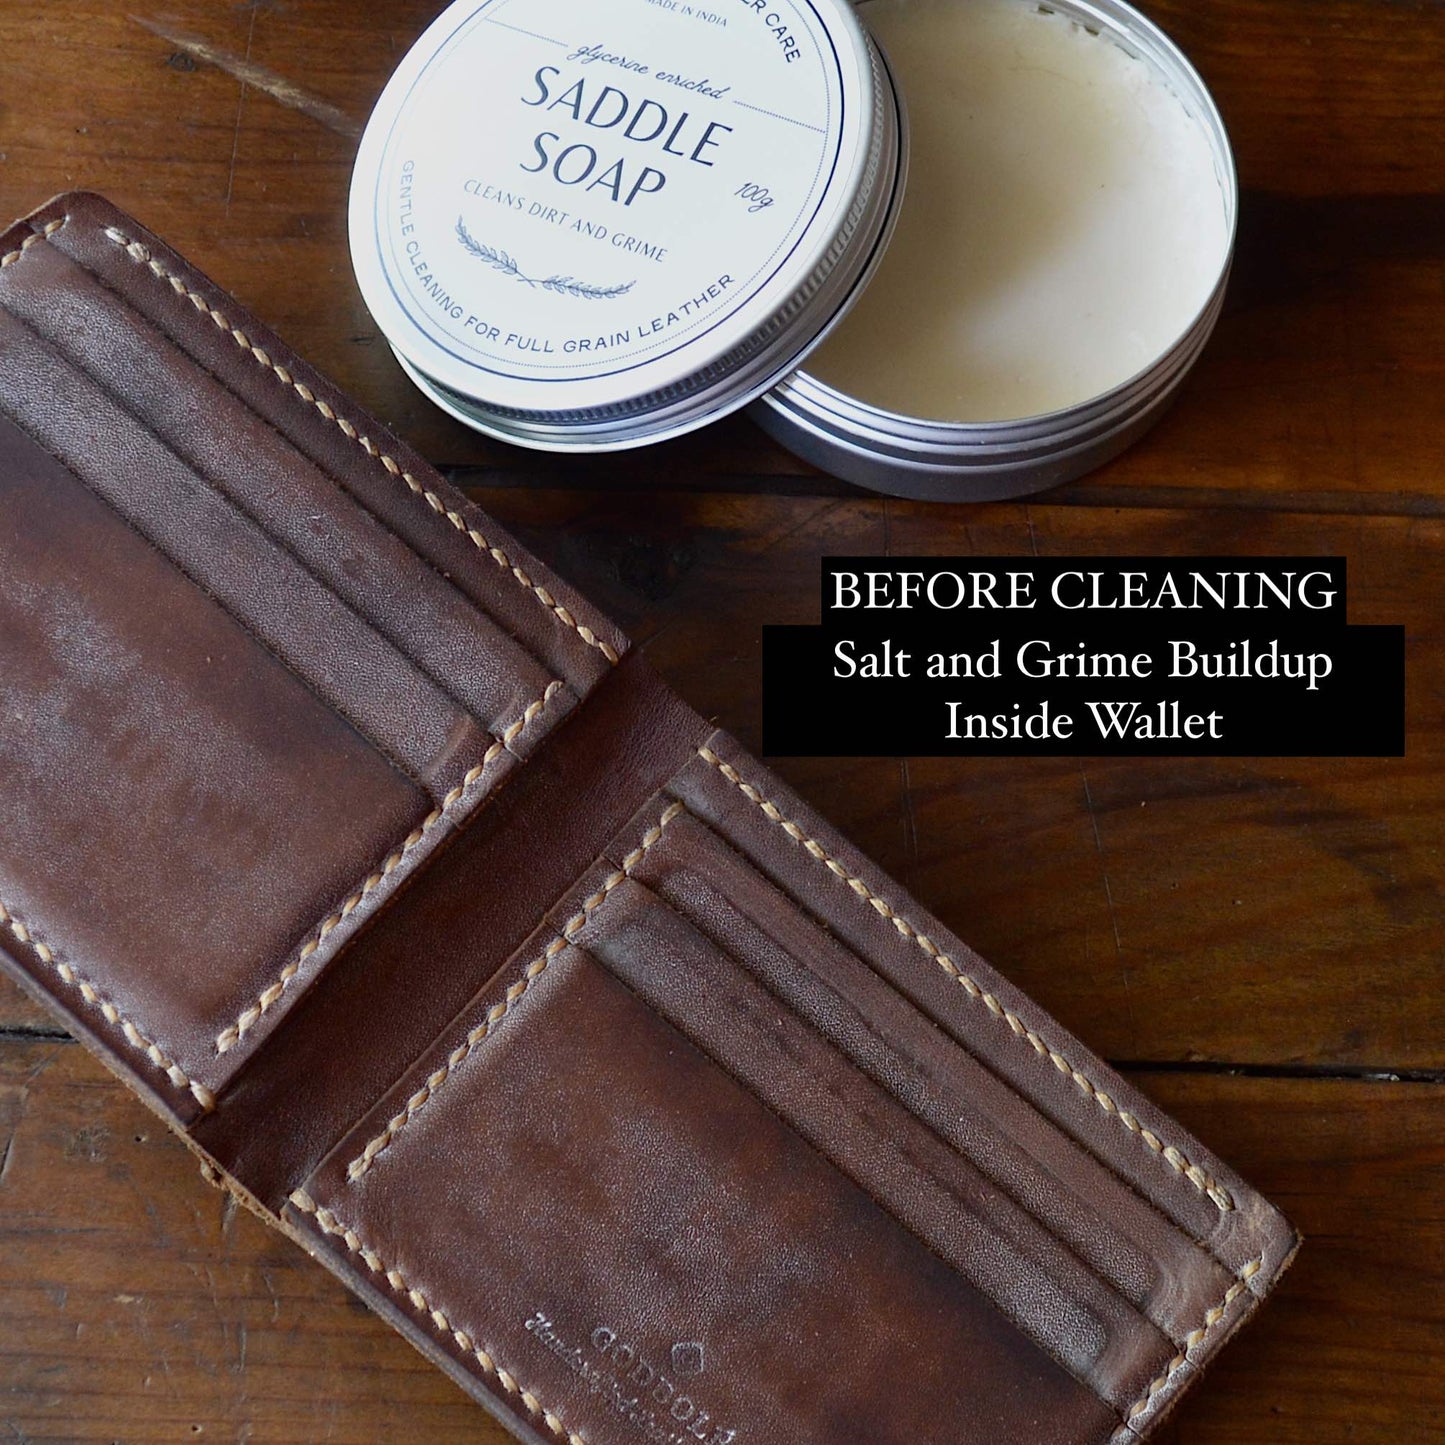 Saddle Soap - Leather Cleaner